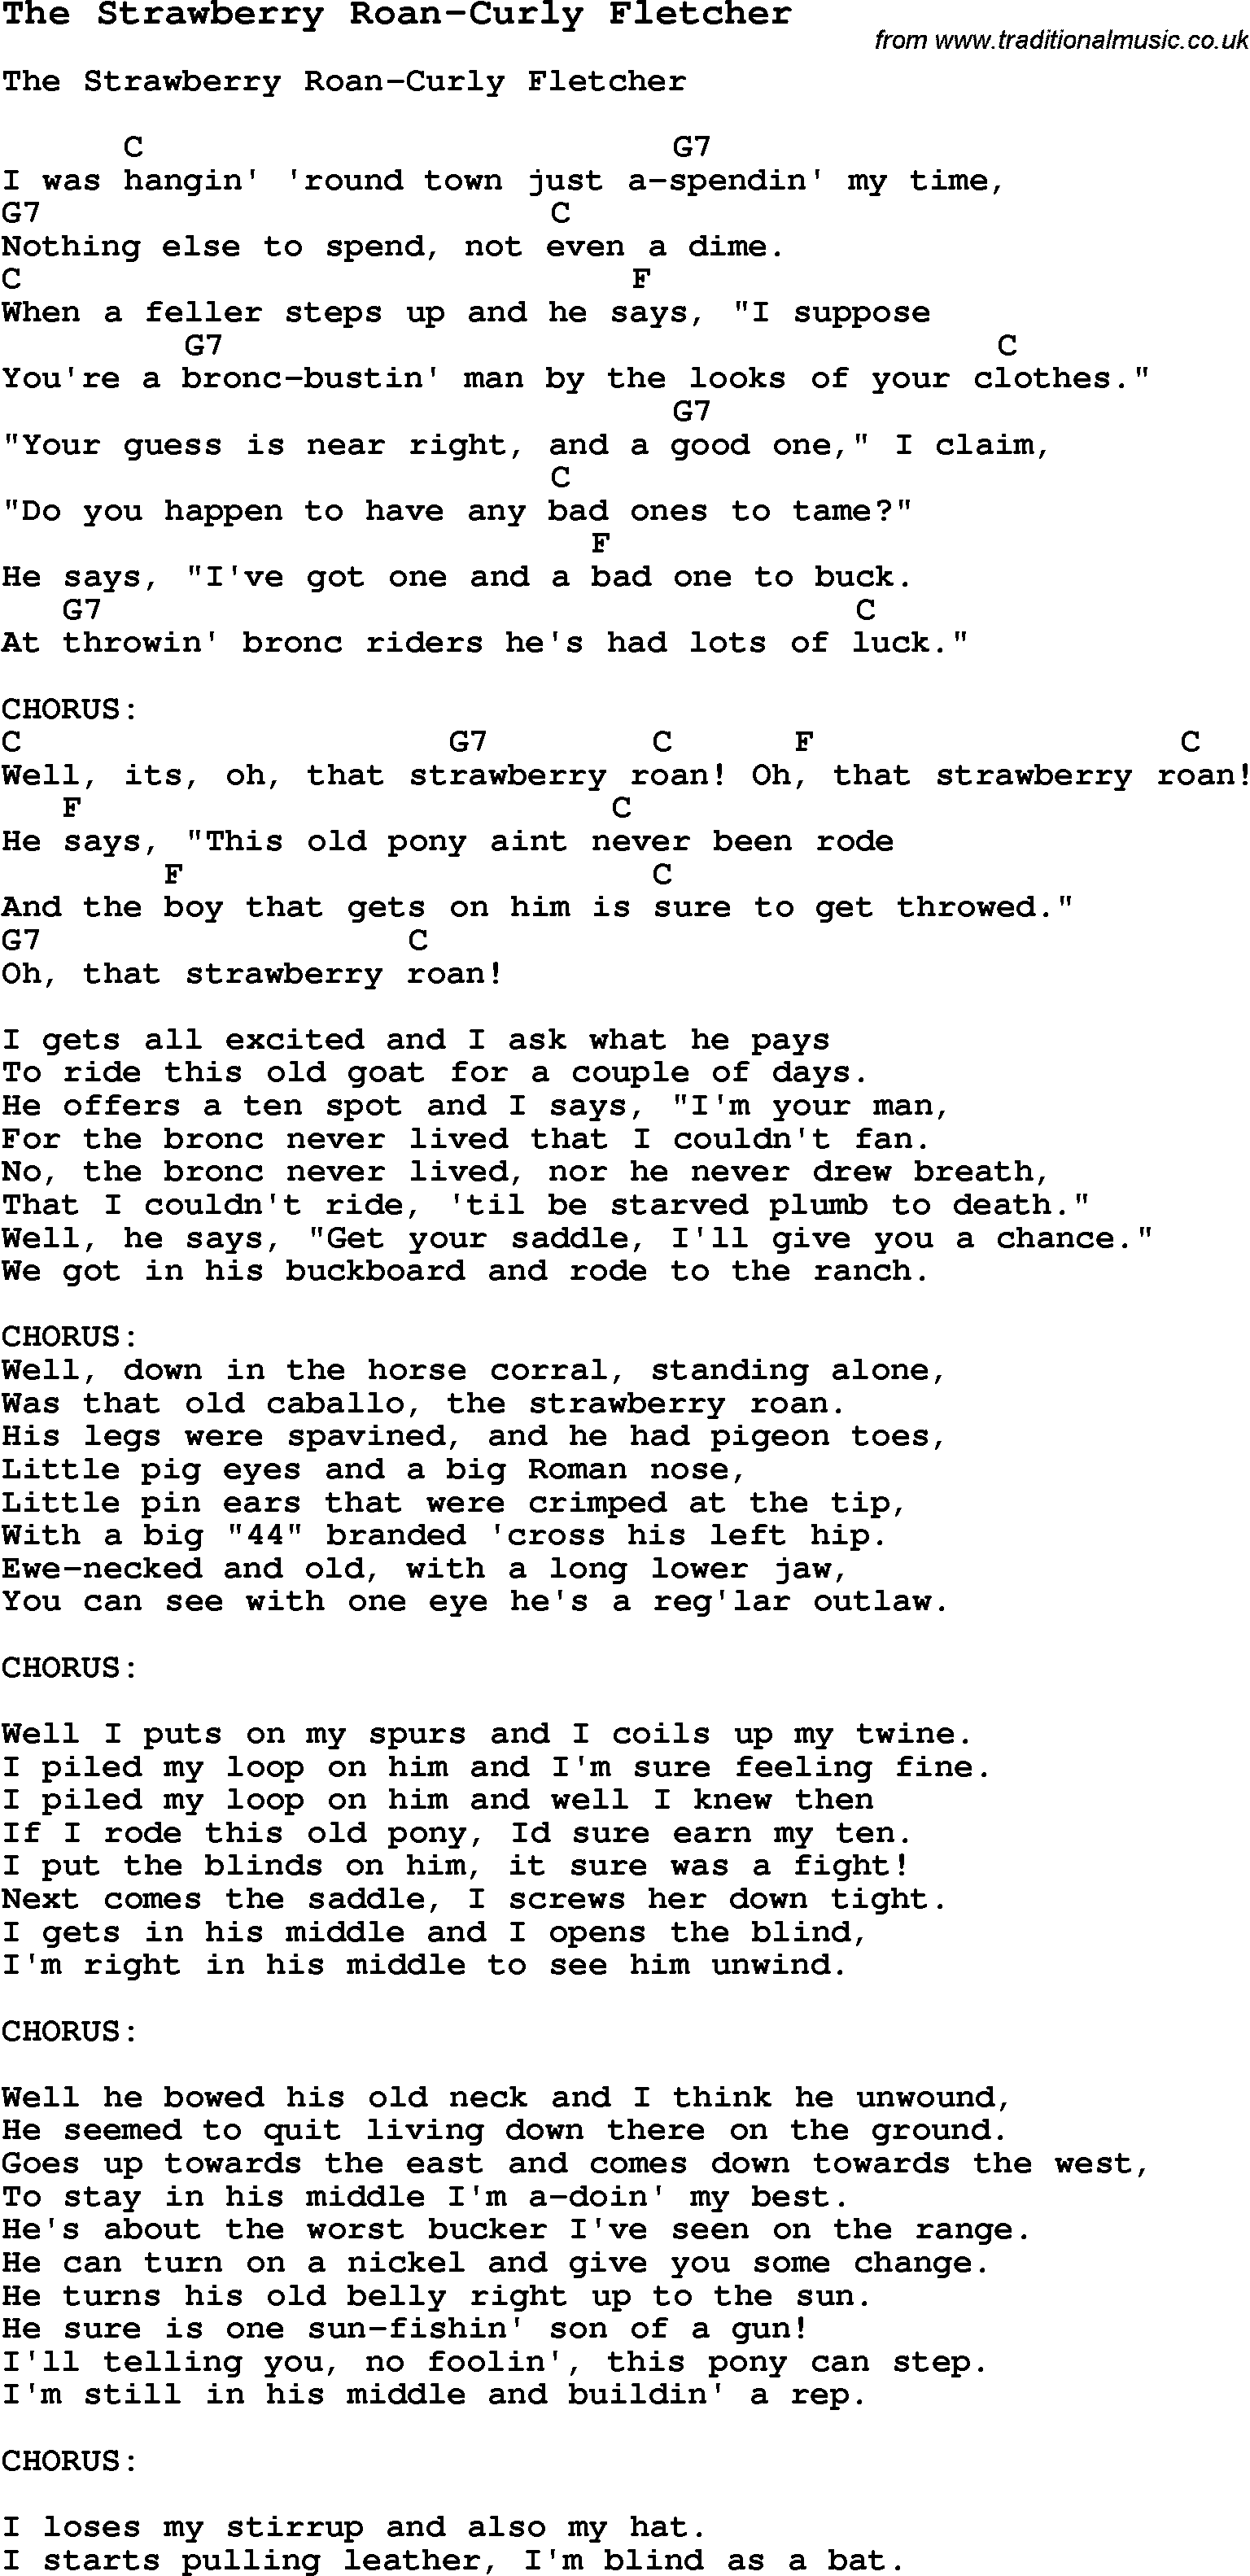 Summer-Camp Song, The Strawberry Roan-Curly Fletcher, with lyrics and chords for Ukulele, Guitar Banjo etc.